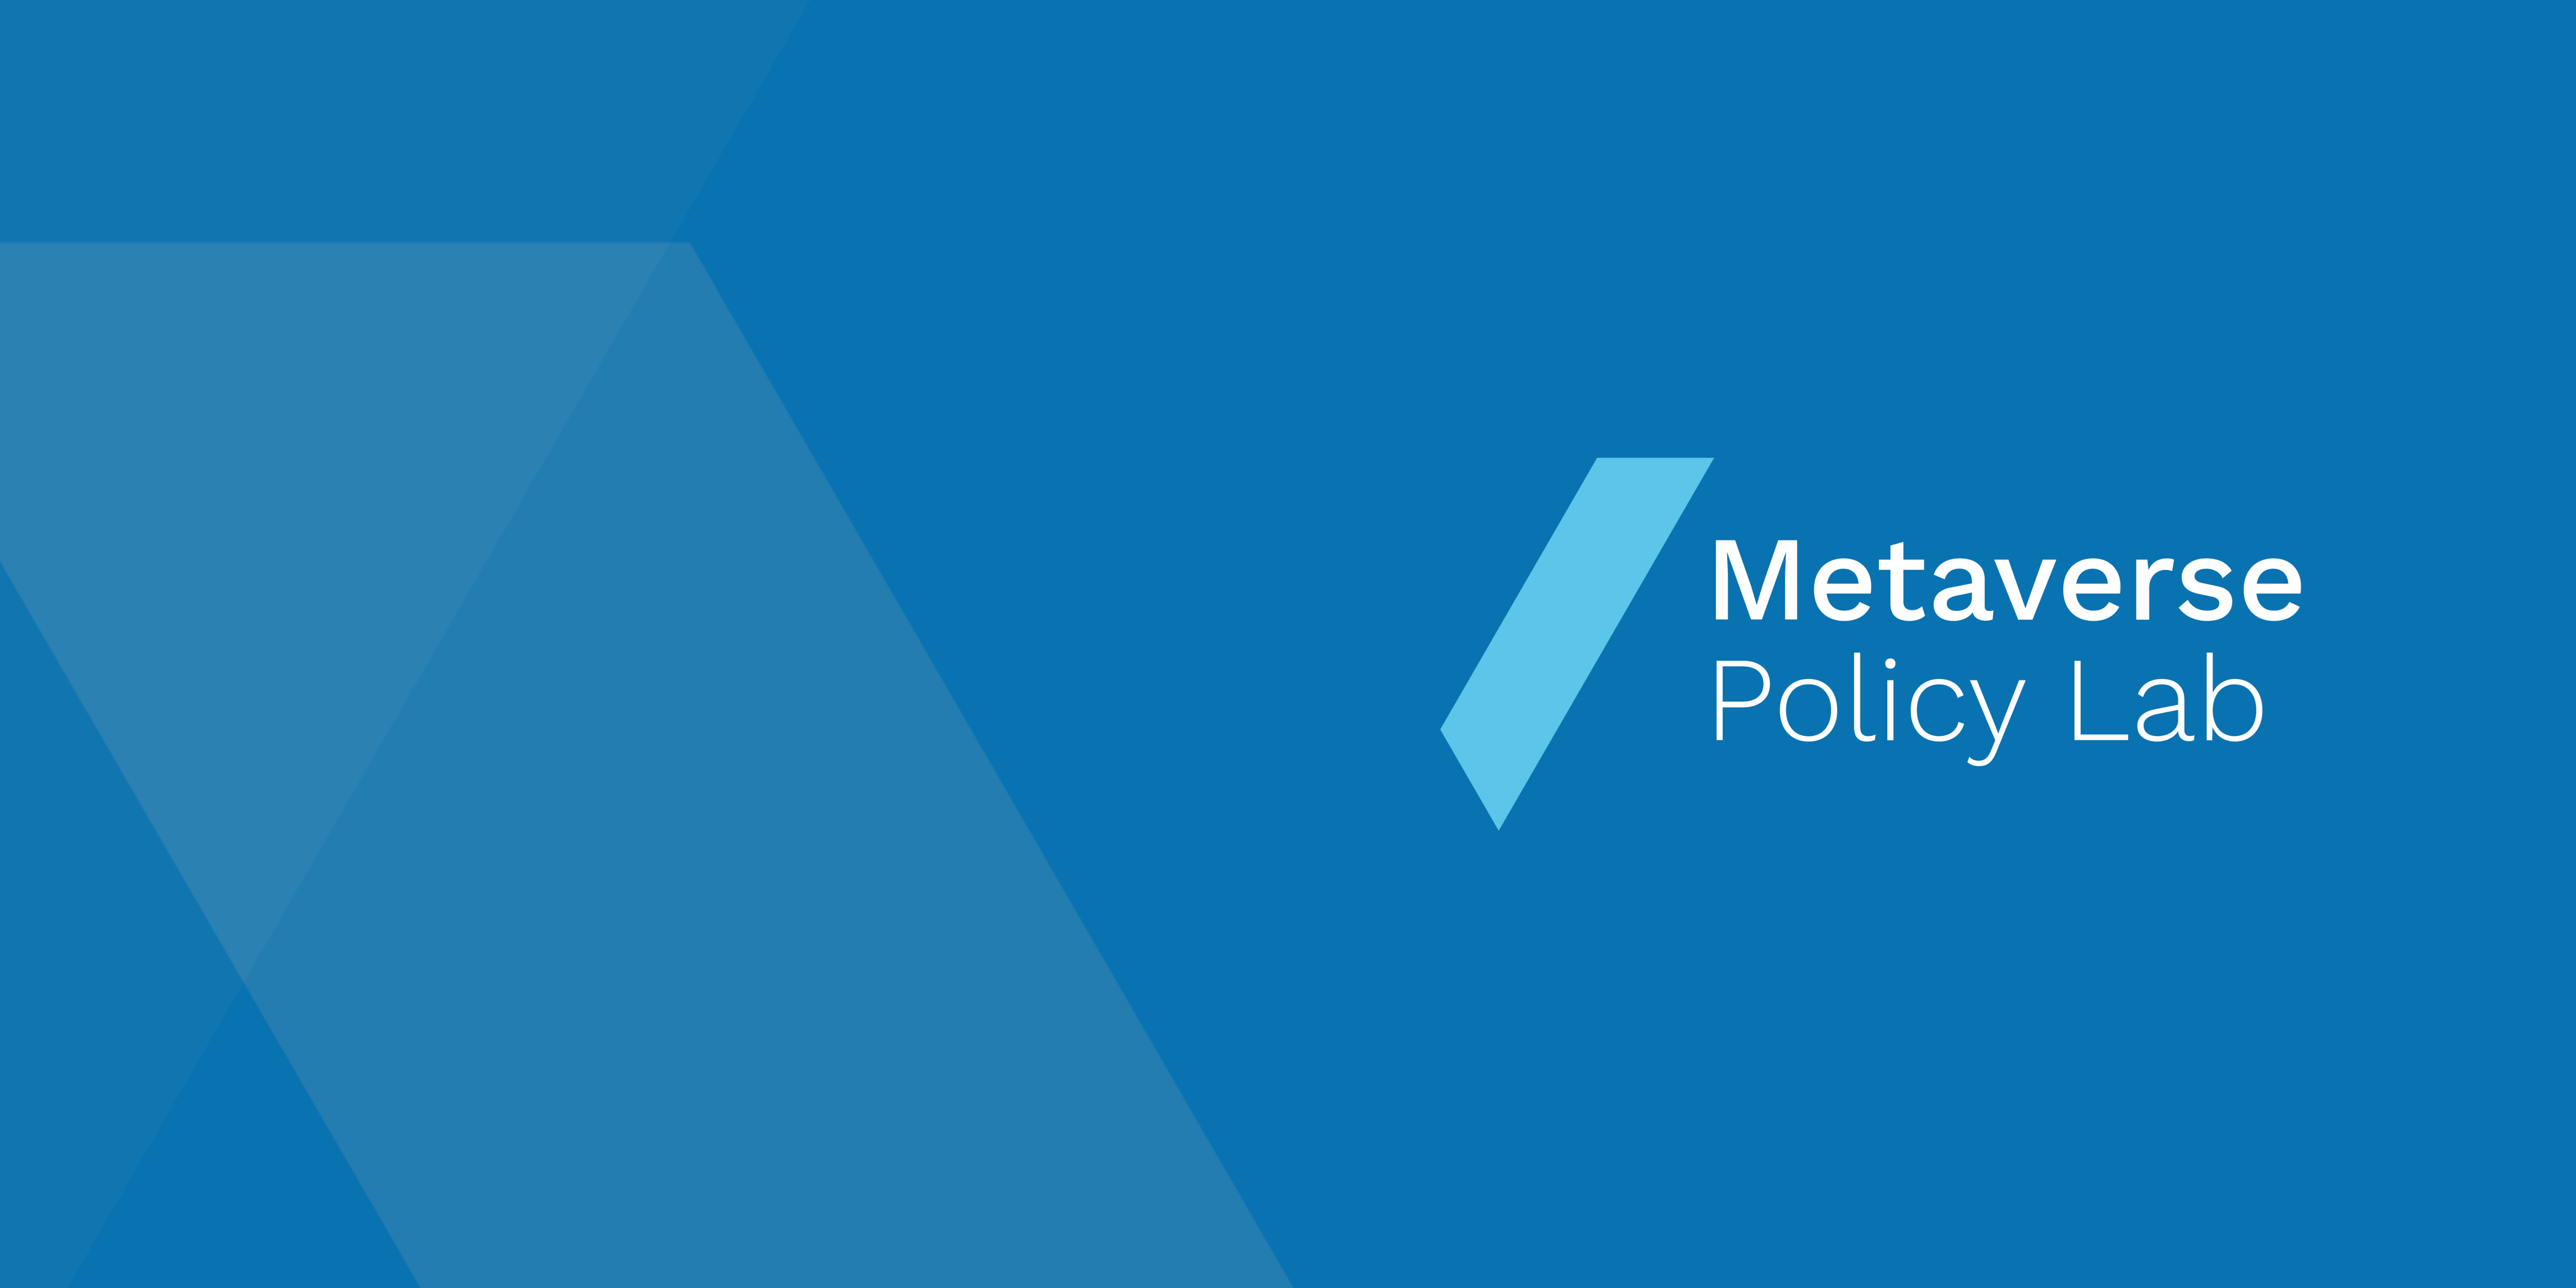 Metaverse Policy Lab